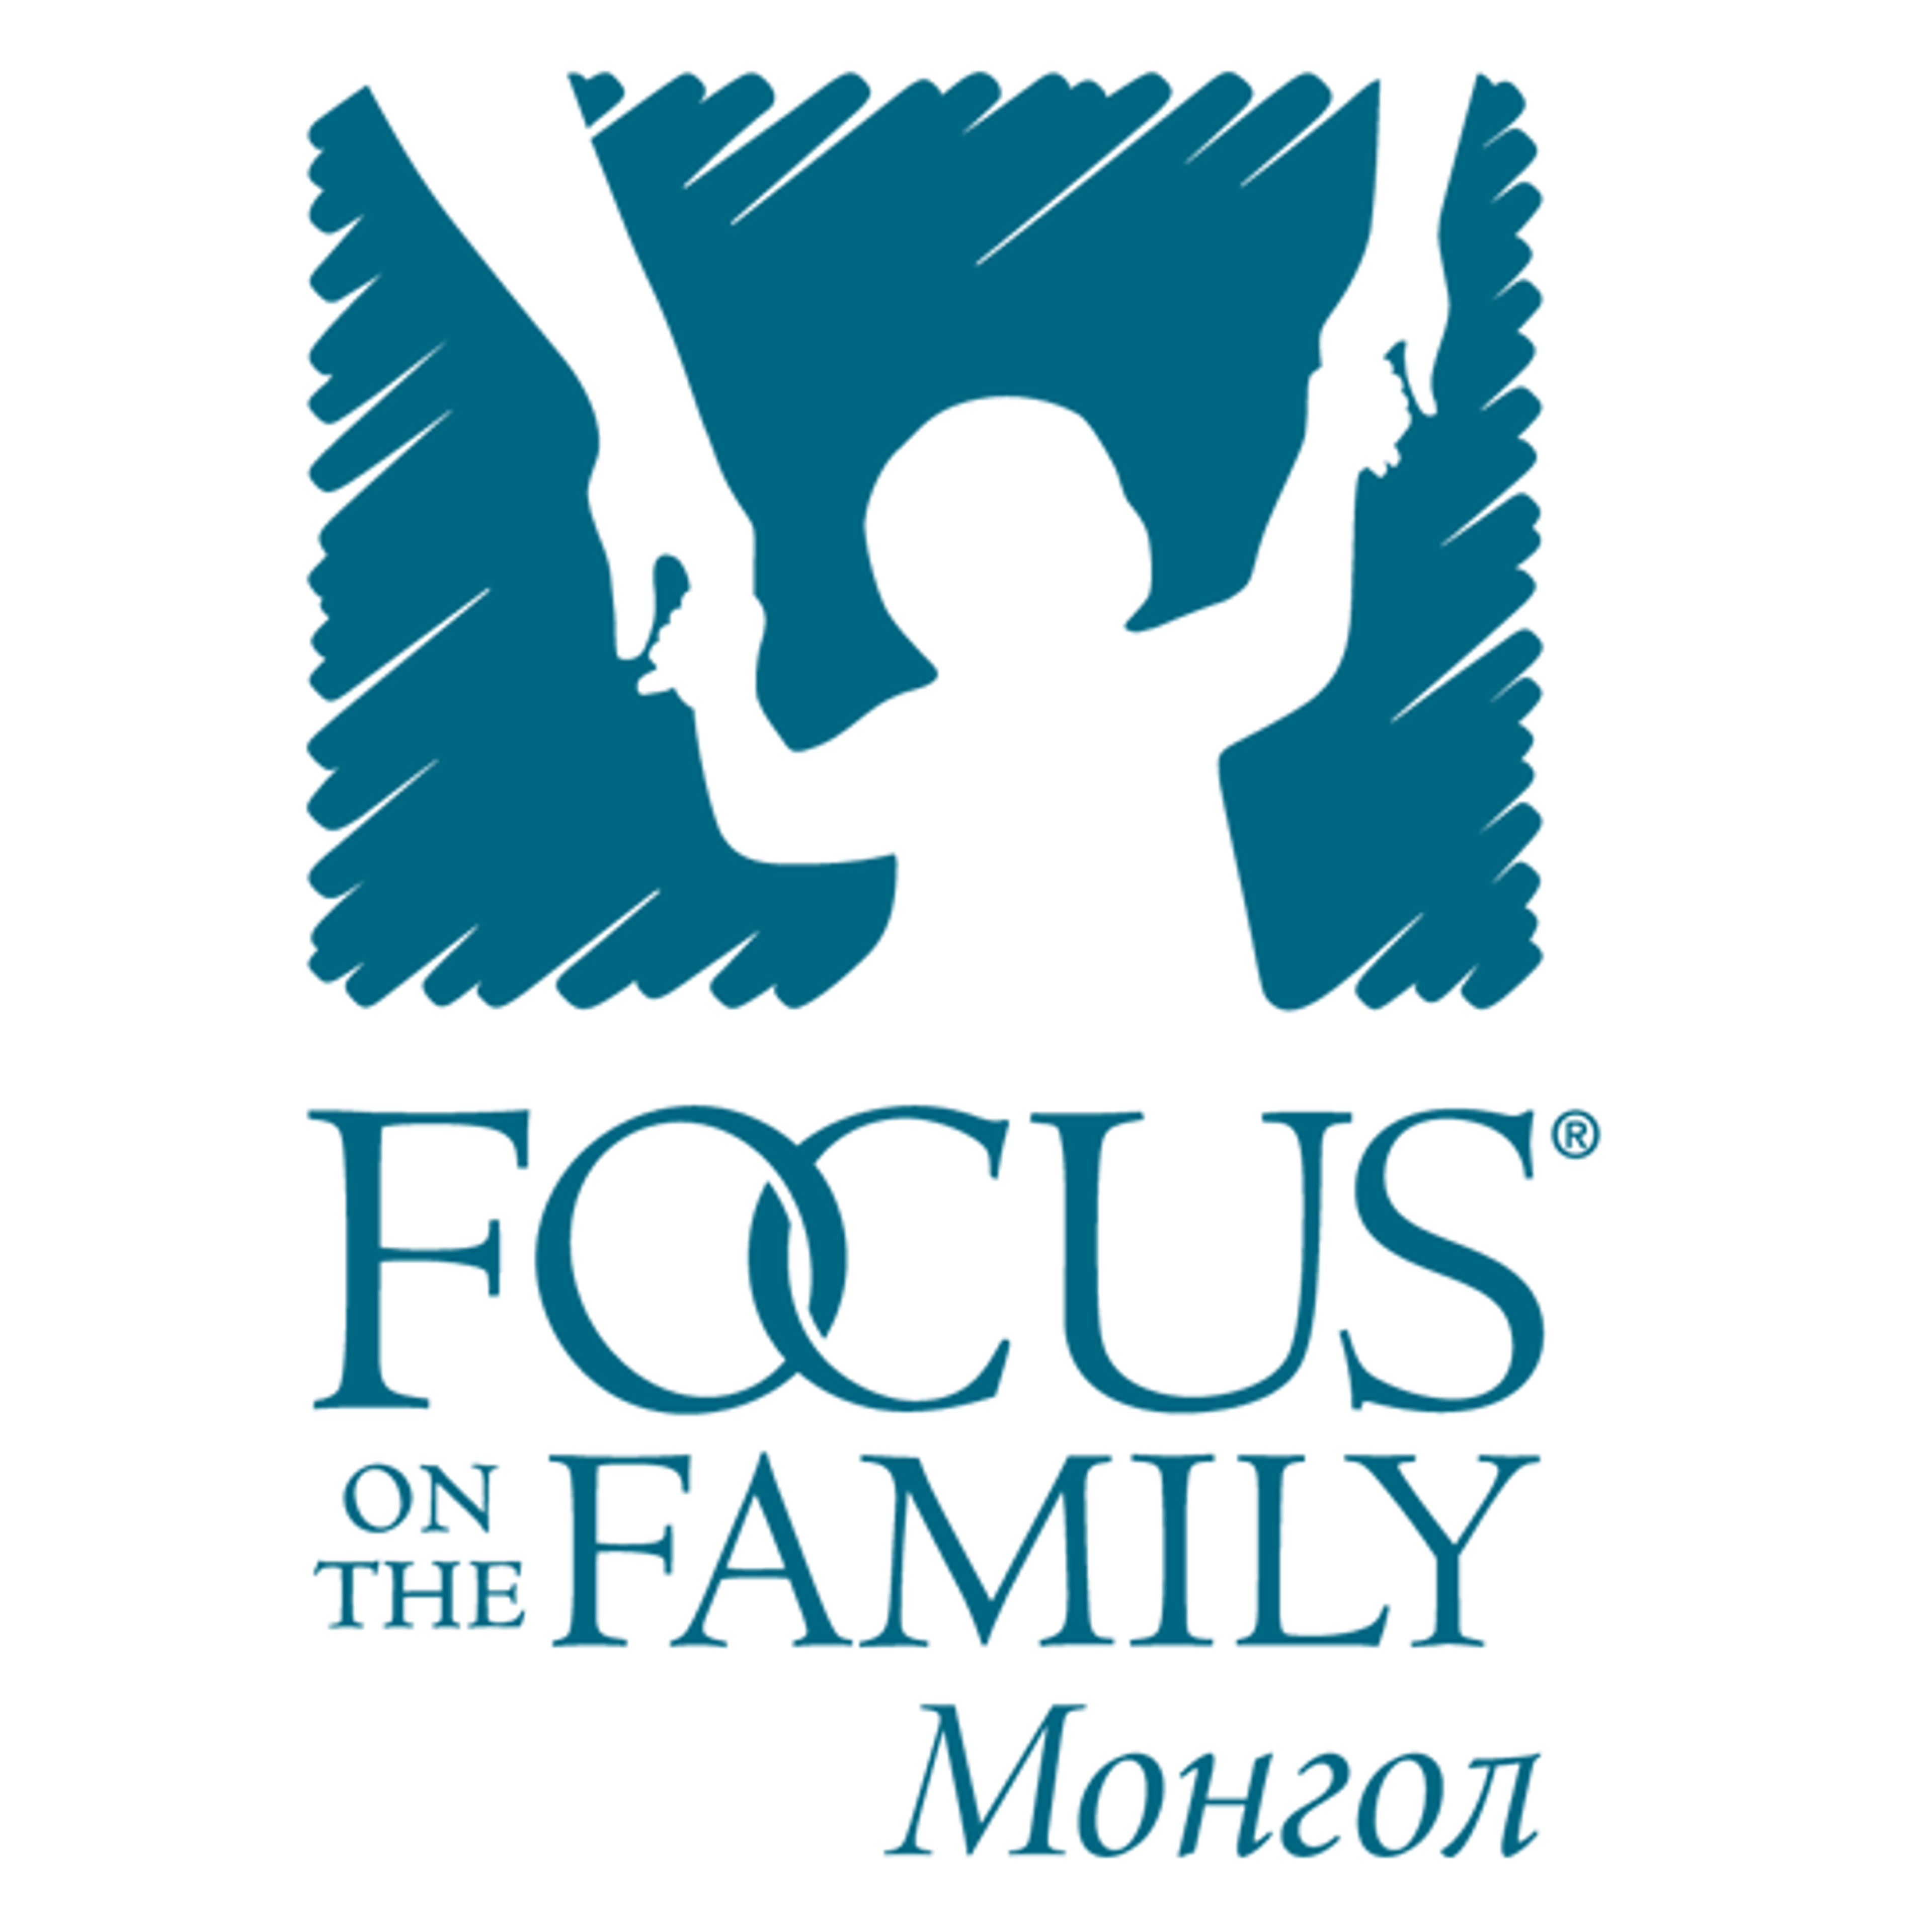 Focus on the family